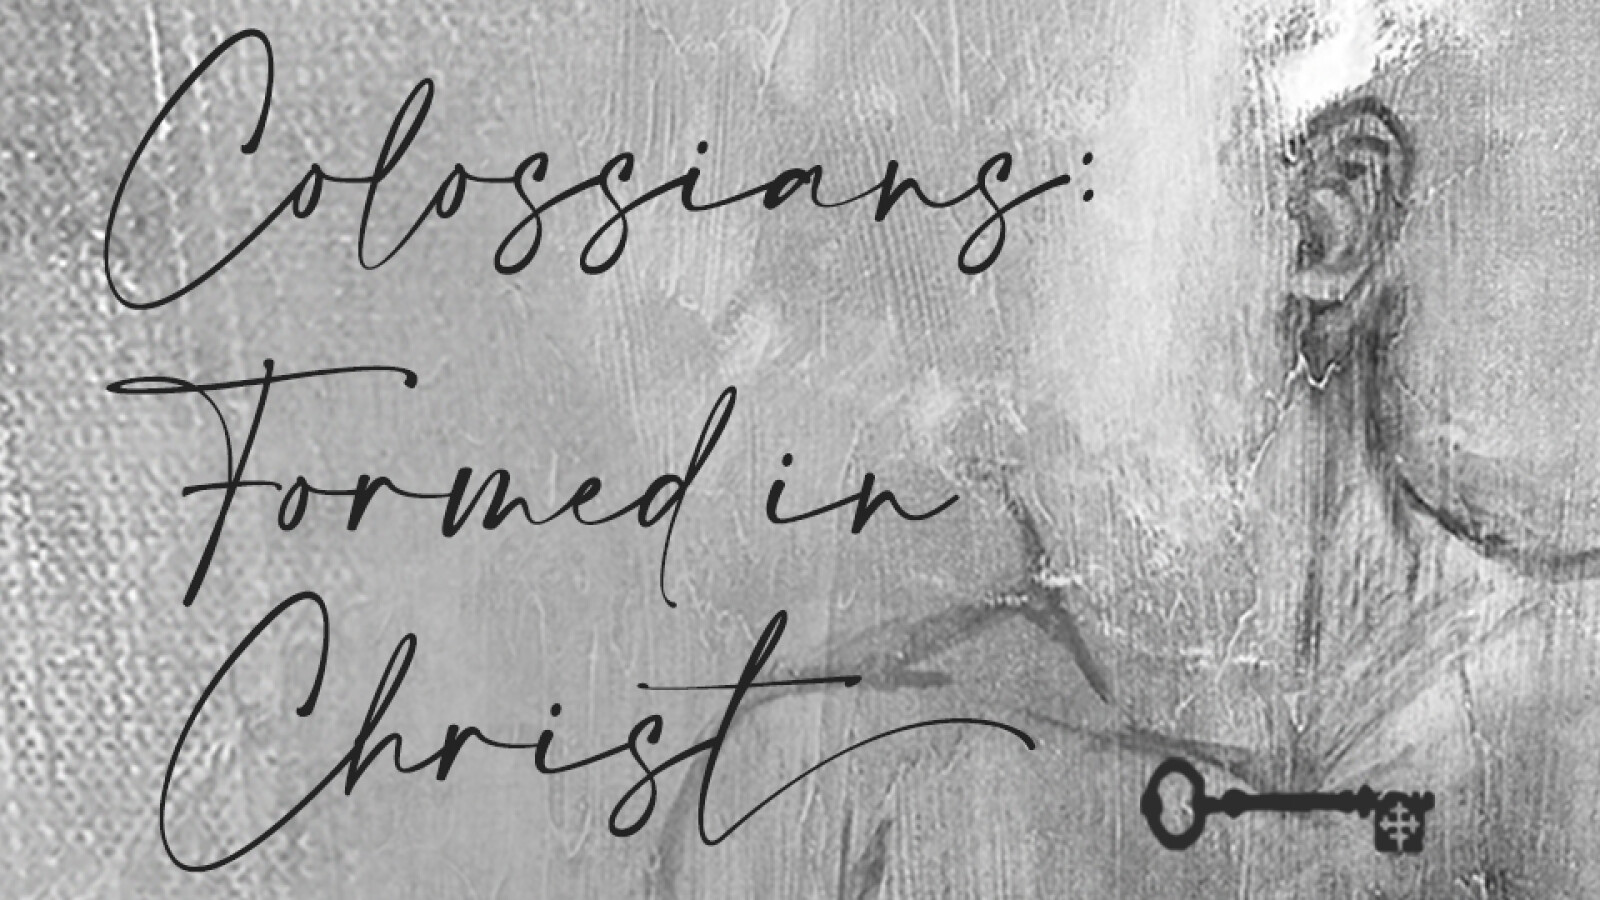 Colossians: Formed in Christ